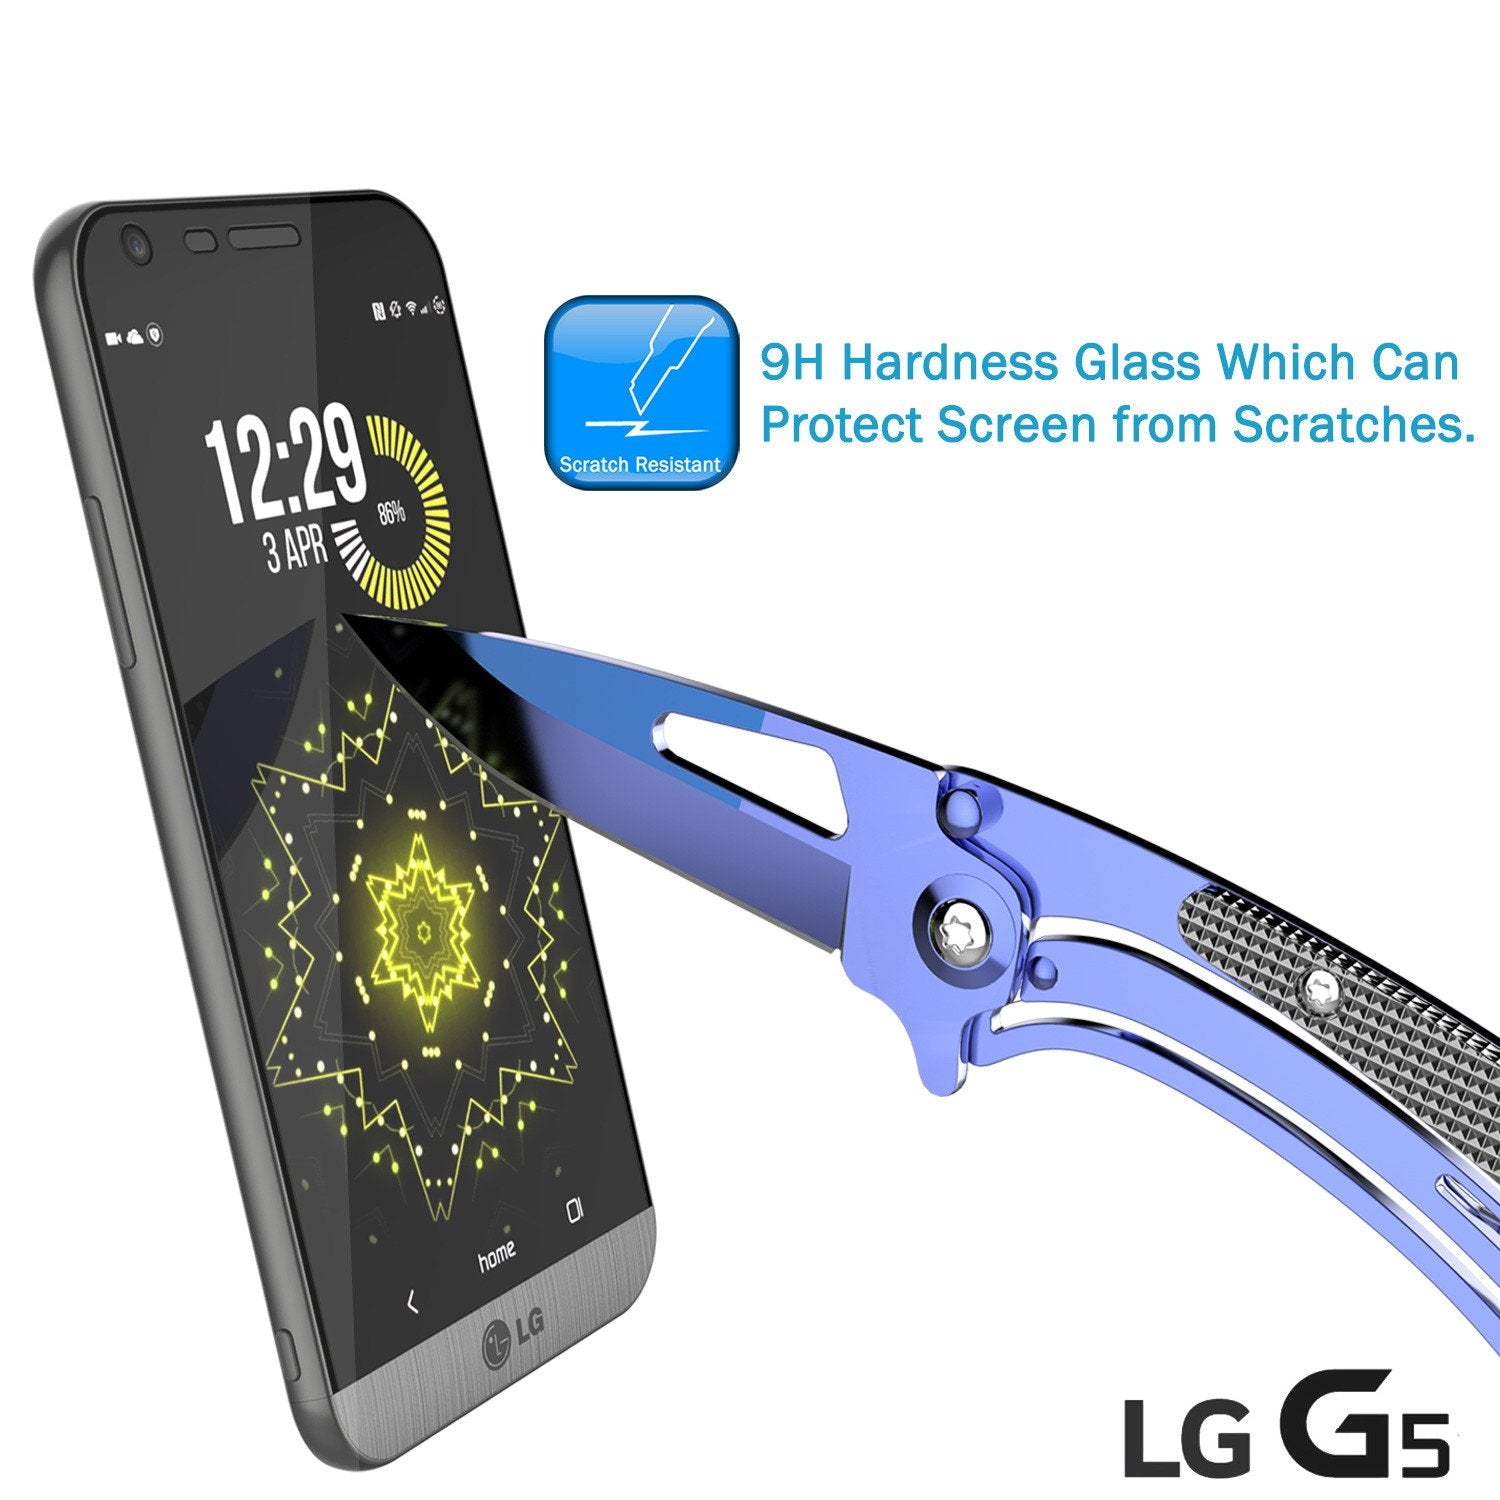 LG G5 Punkcase Glass SHIELD Tempered Glass Screen Protector 0.33mm Thick 9H Glass